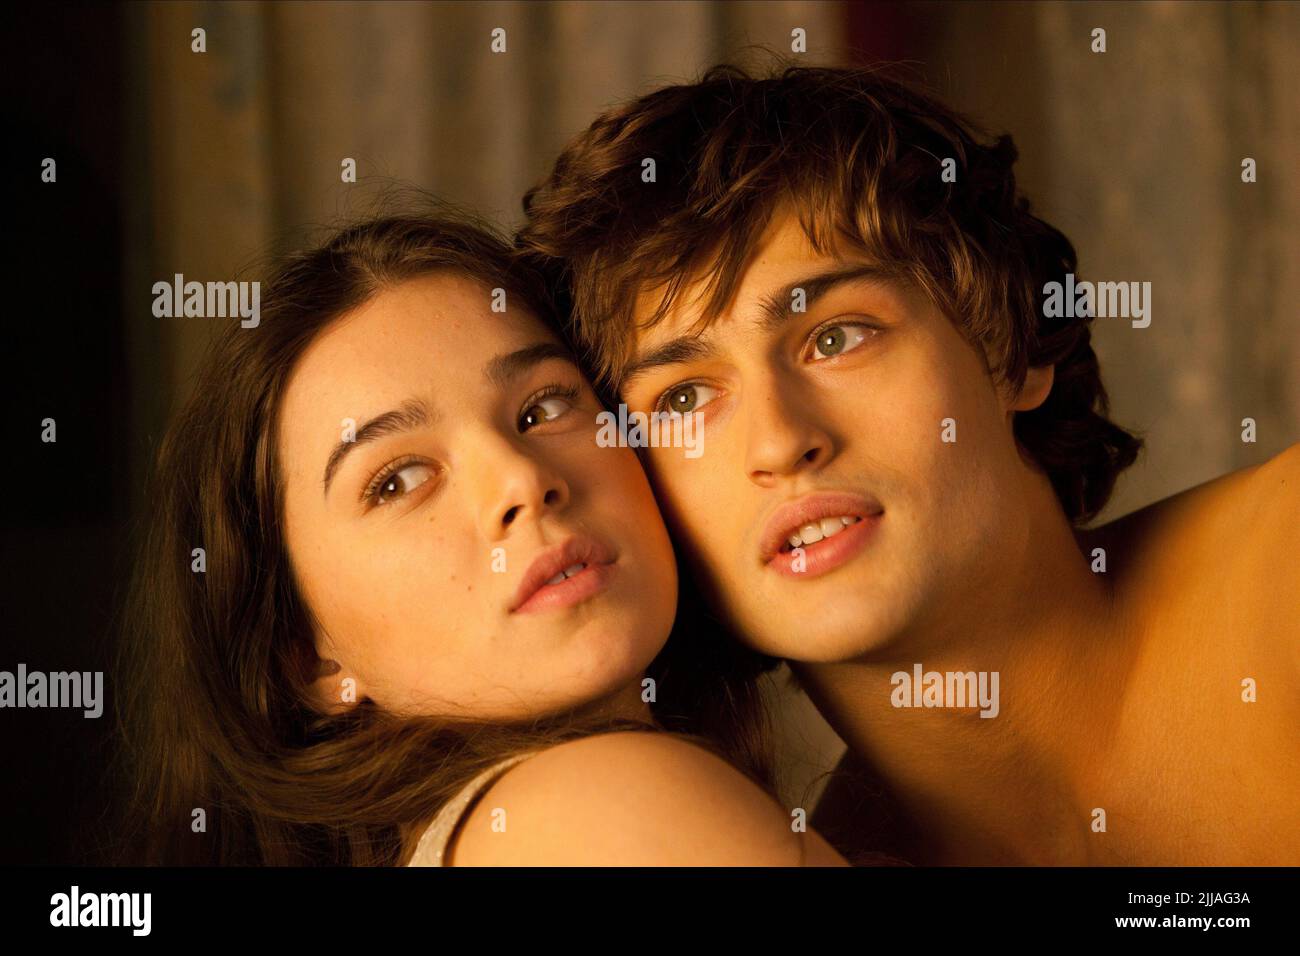 STEINFELD,BOOTH, ROMEO AND JULIET, 2013 Stock Photo